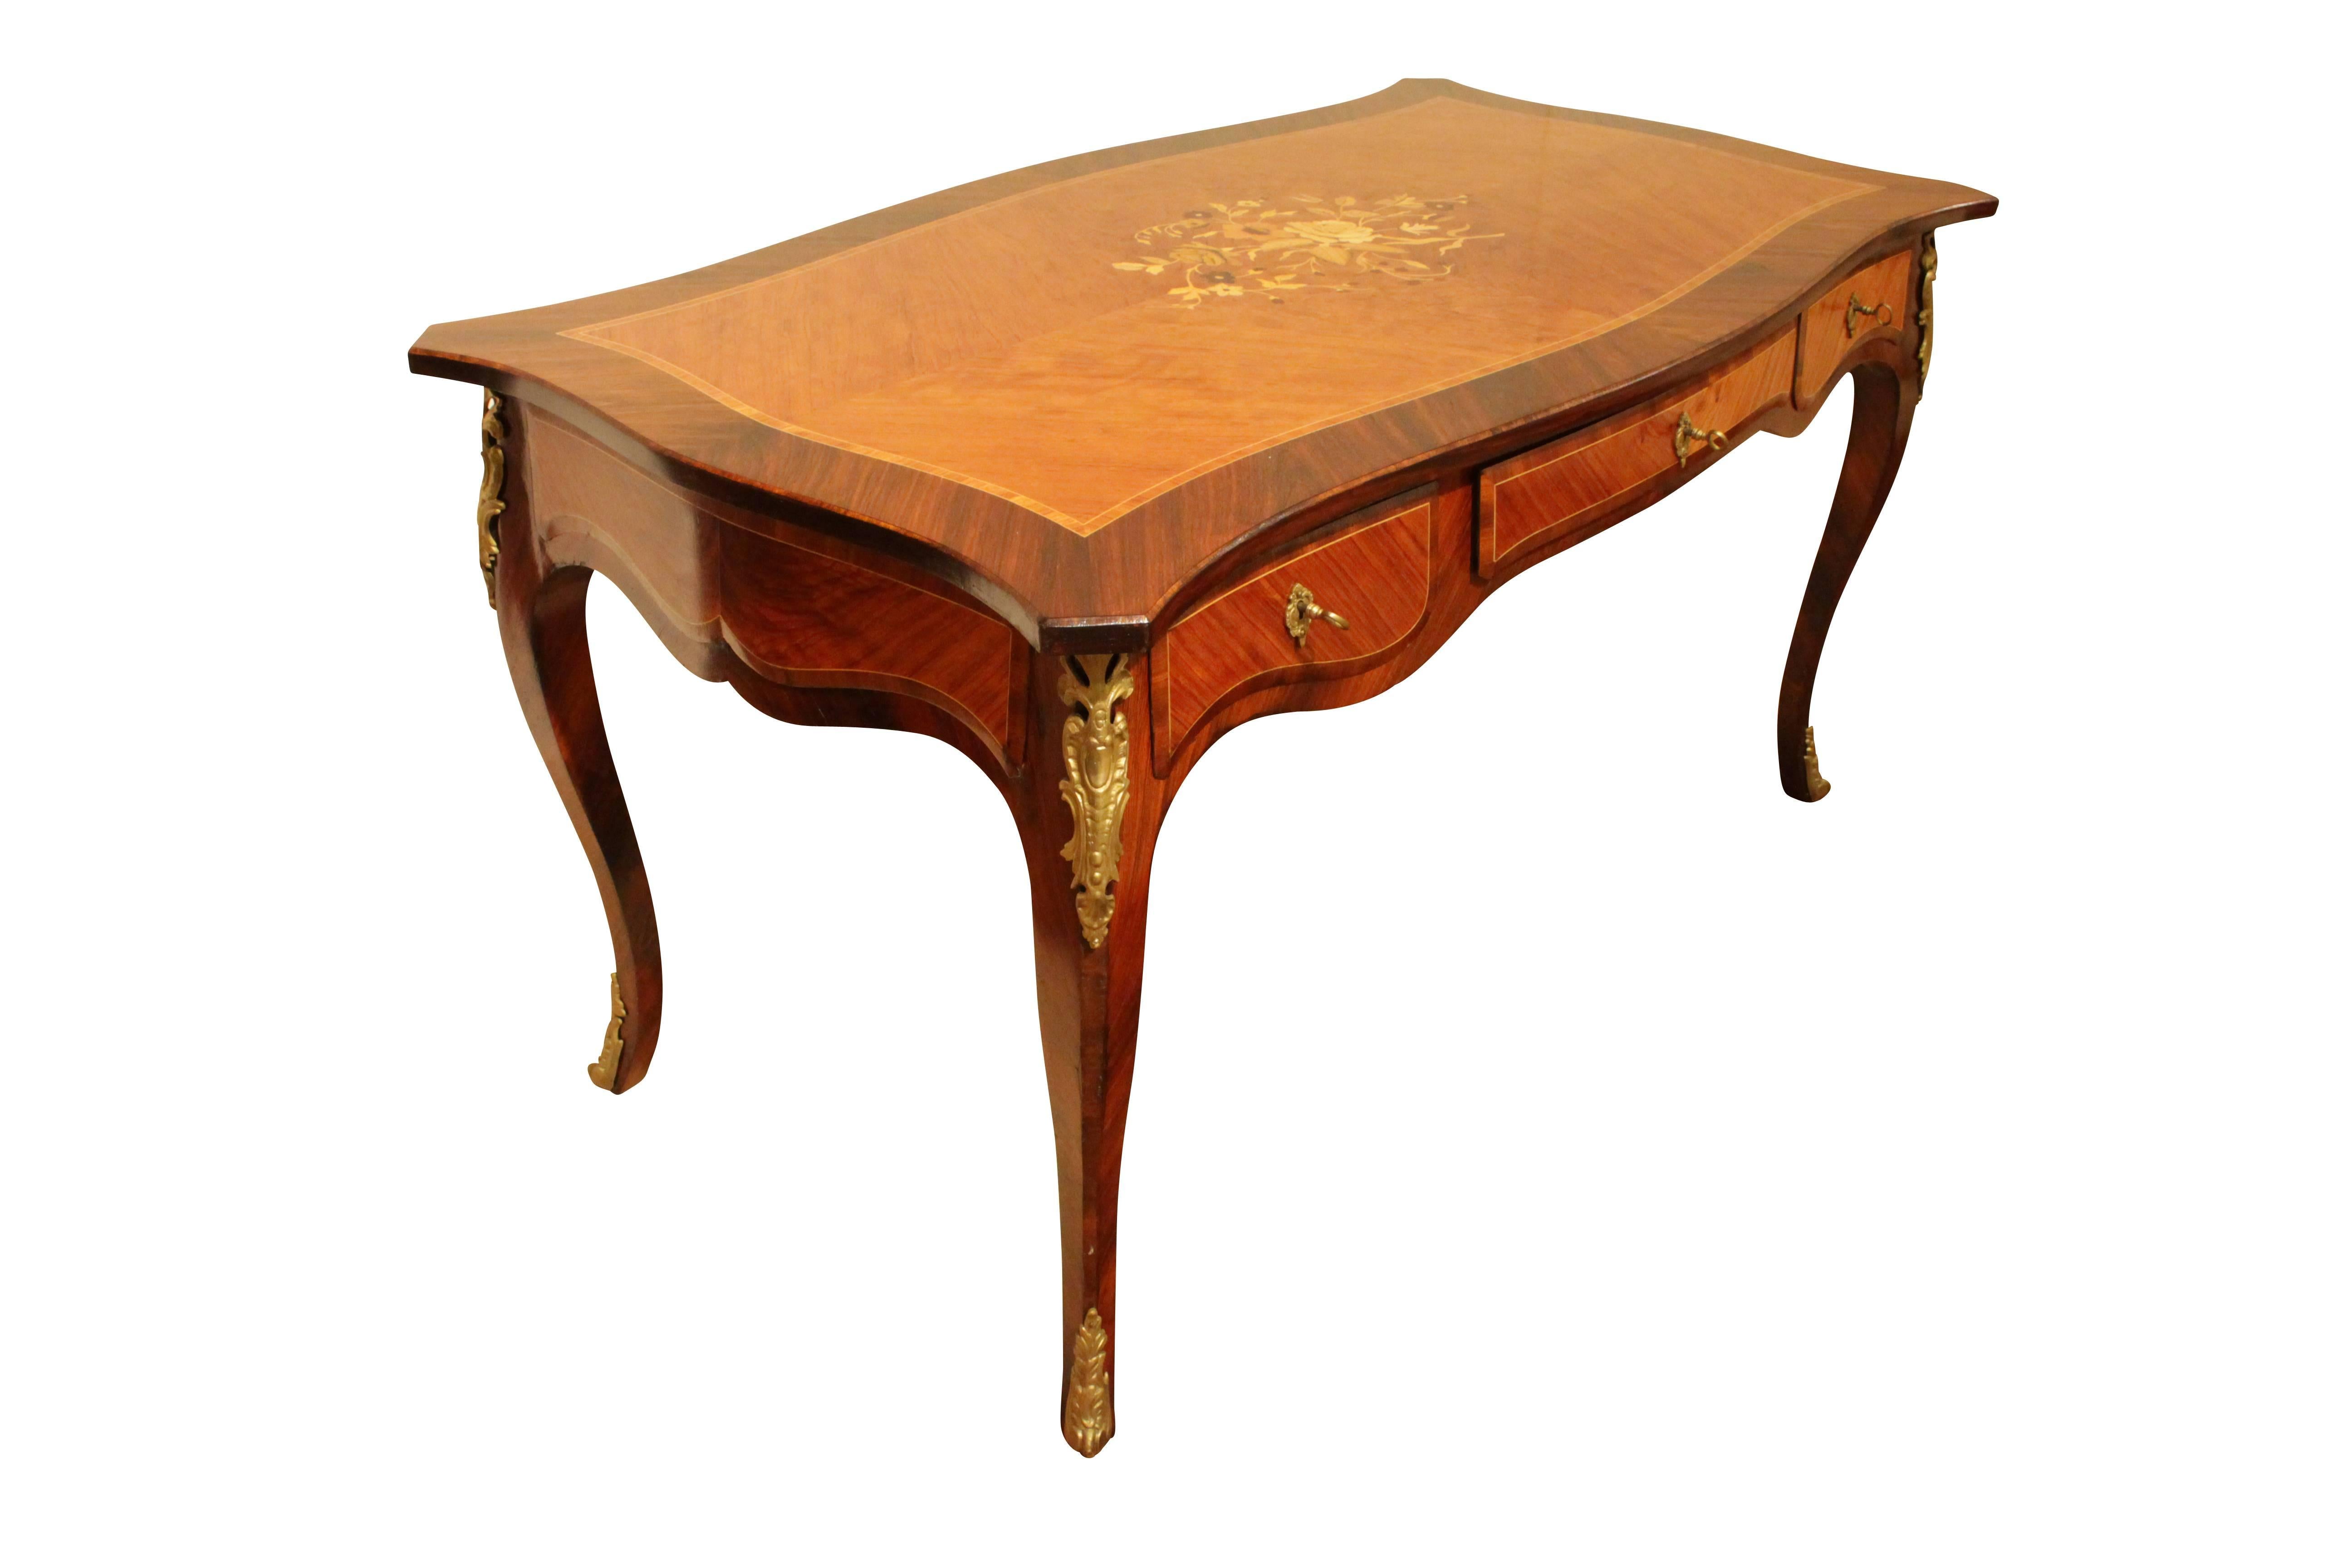 Very nice desk in Louis XV style with great marquetry. The French Bureau can be centered. The desk is equipped with three drawers. The desk was made circa 1900.